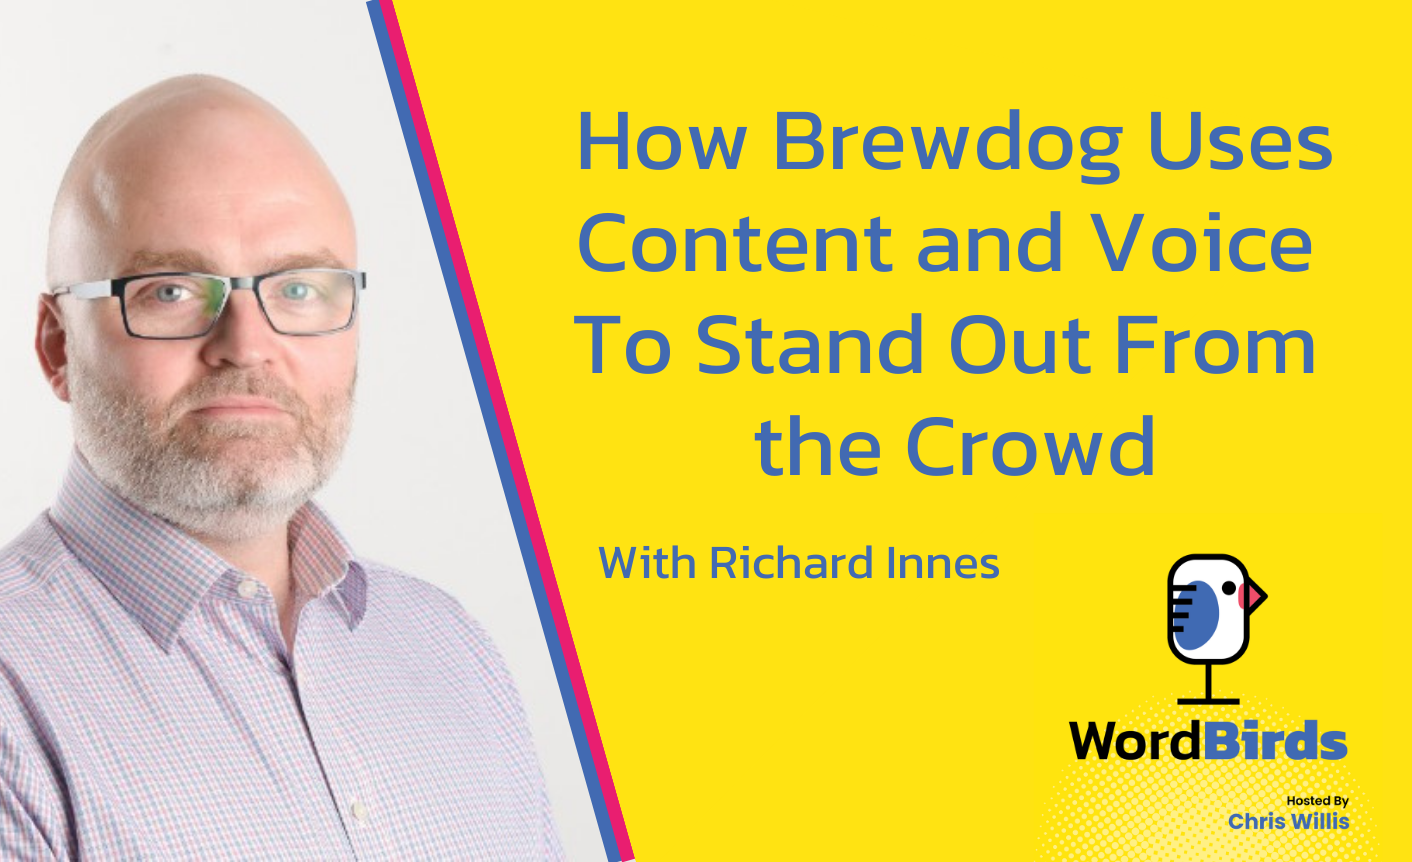 On a yellow text in blue writing is the title "How Brewdog Uses Content and Voice To Stand Out From the Crowd." On the left of the image is a picture of Richard Innes